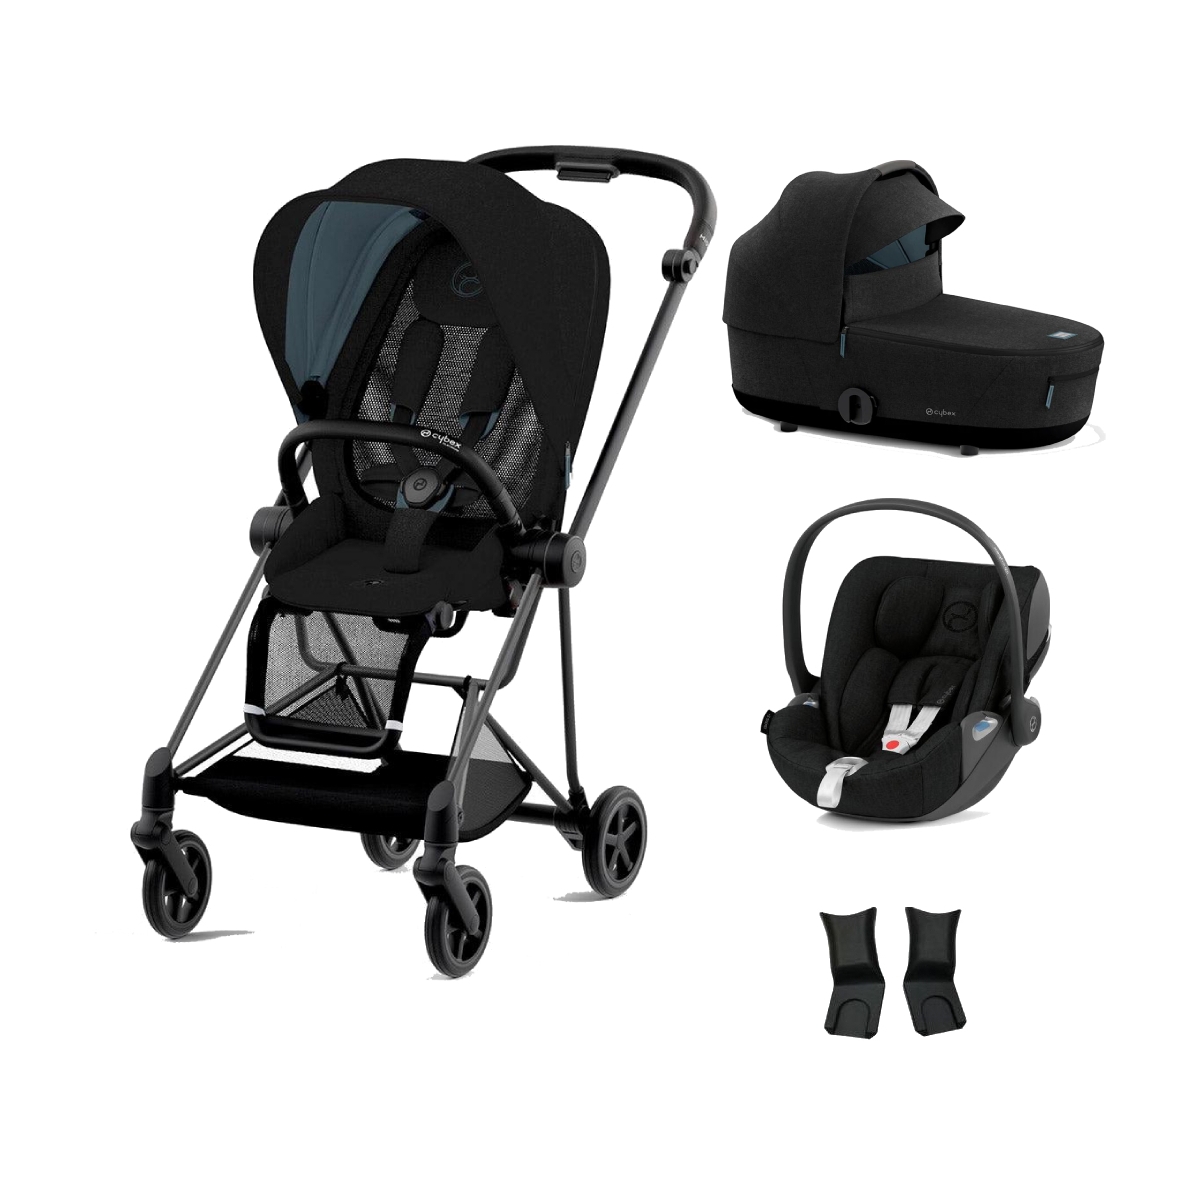 Cybex Mios Black Pushchair with Lux Carry Cot & Cloud Z Car Seat